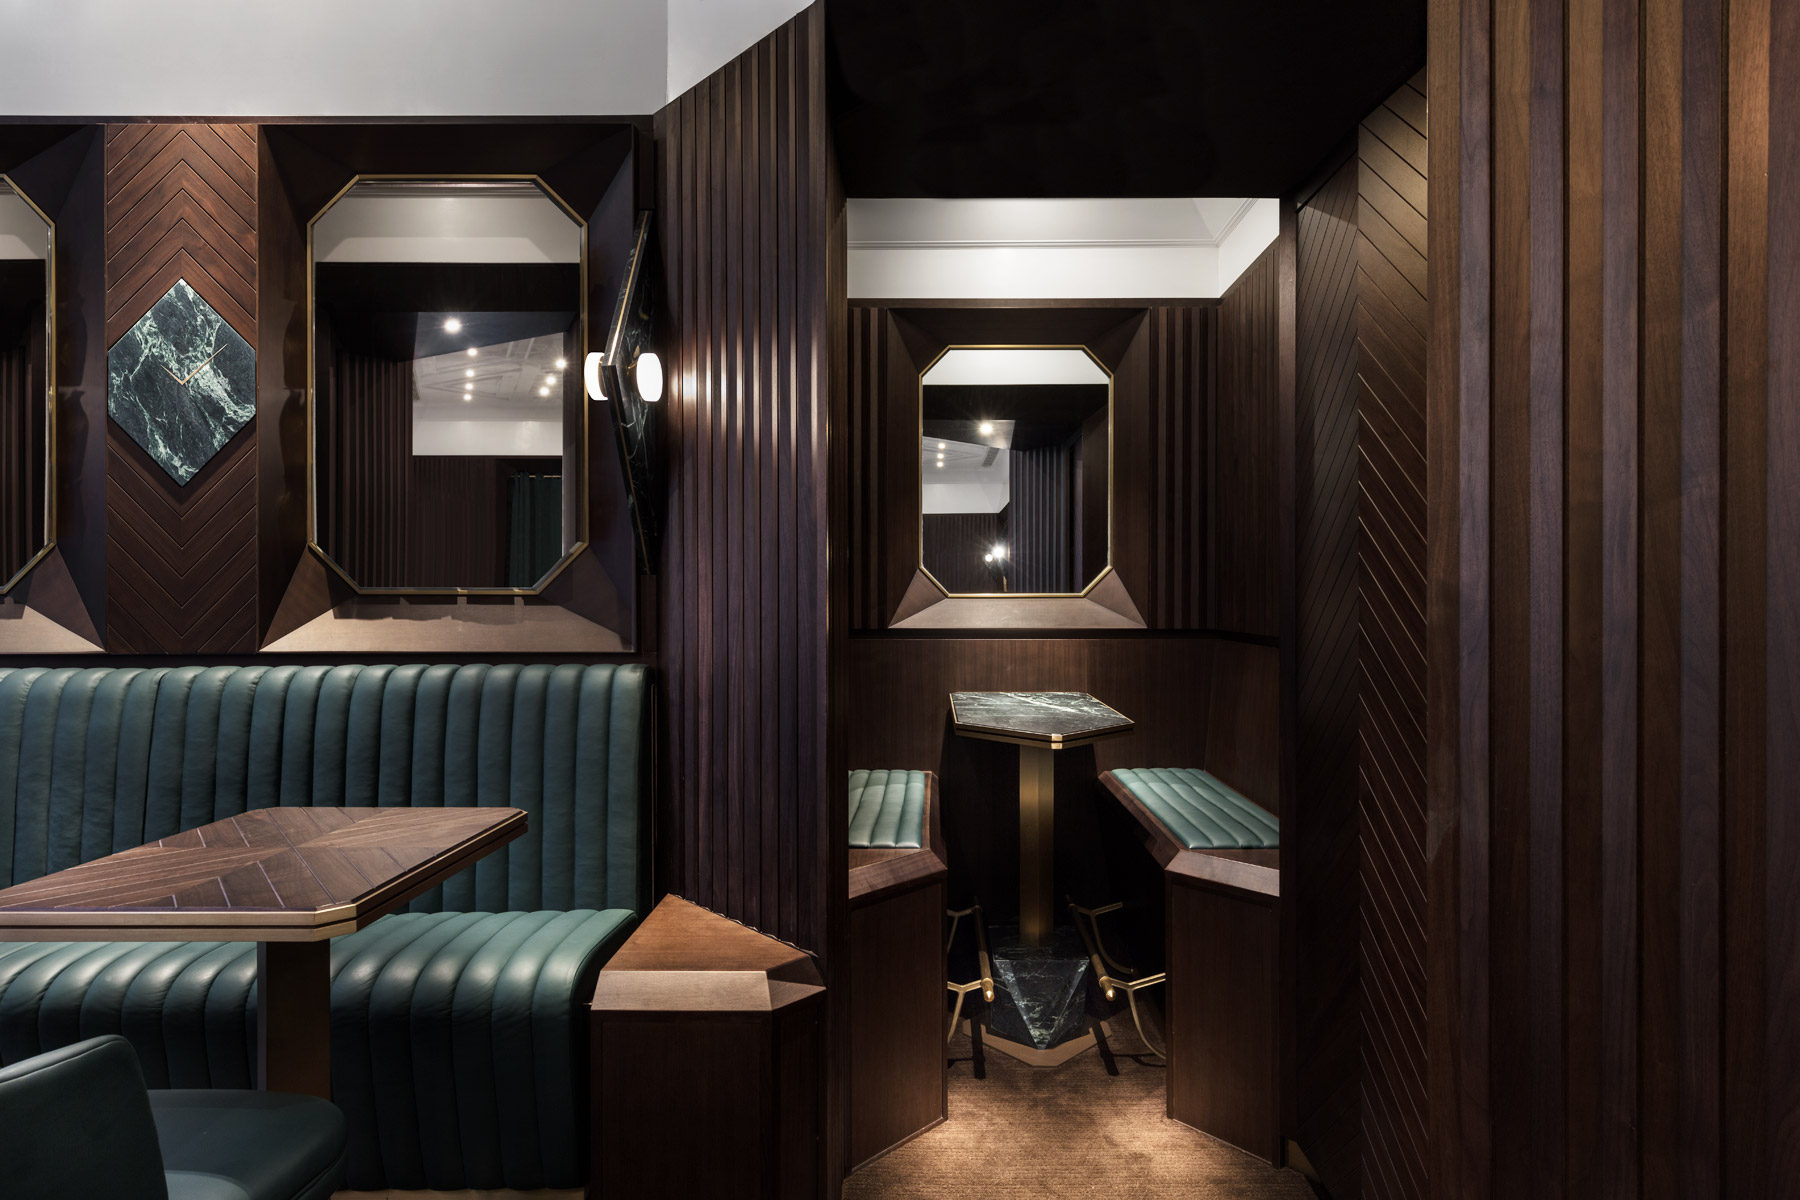 Fuel Espresso creates a gentleman’s club for coffee lovers in ICC